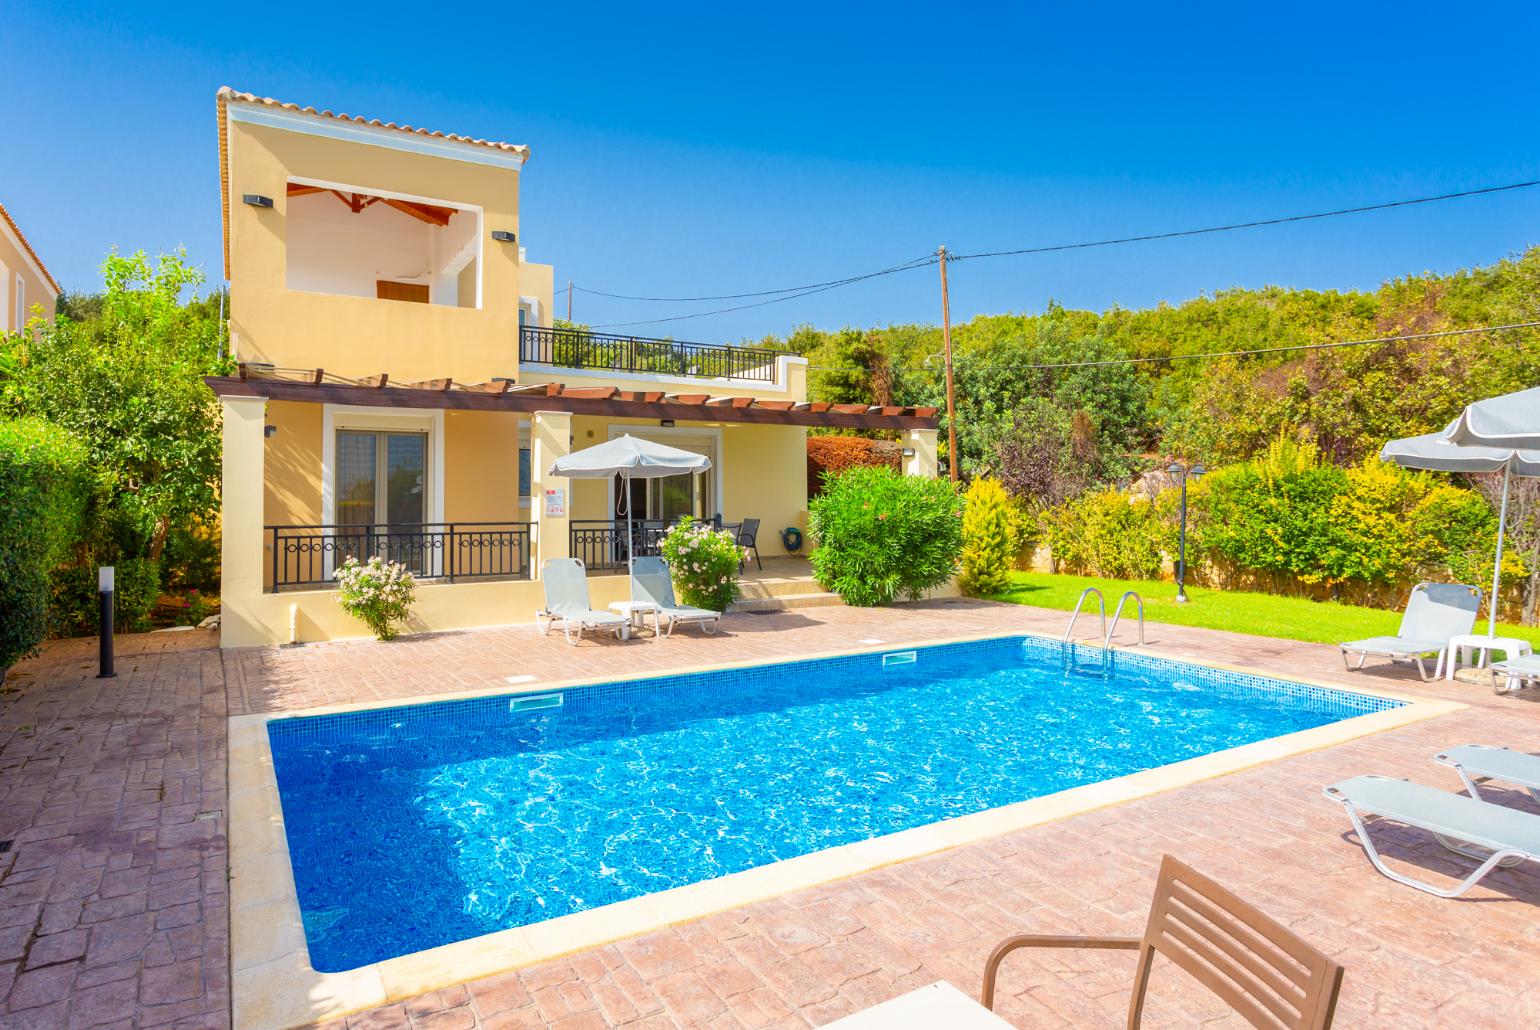 Beautiful villa with private pool, terrace, and large garden